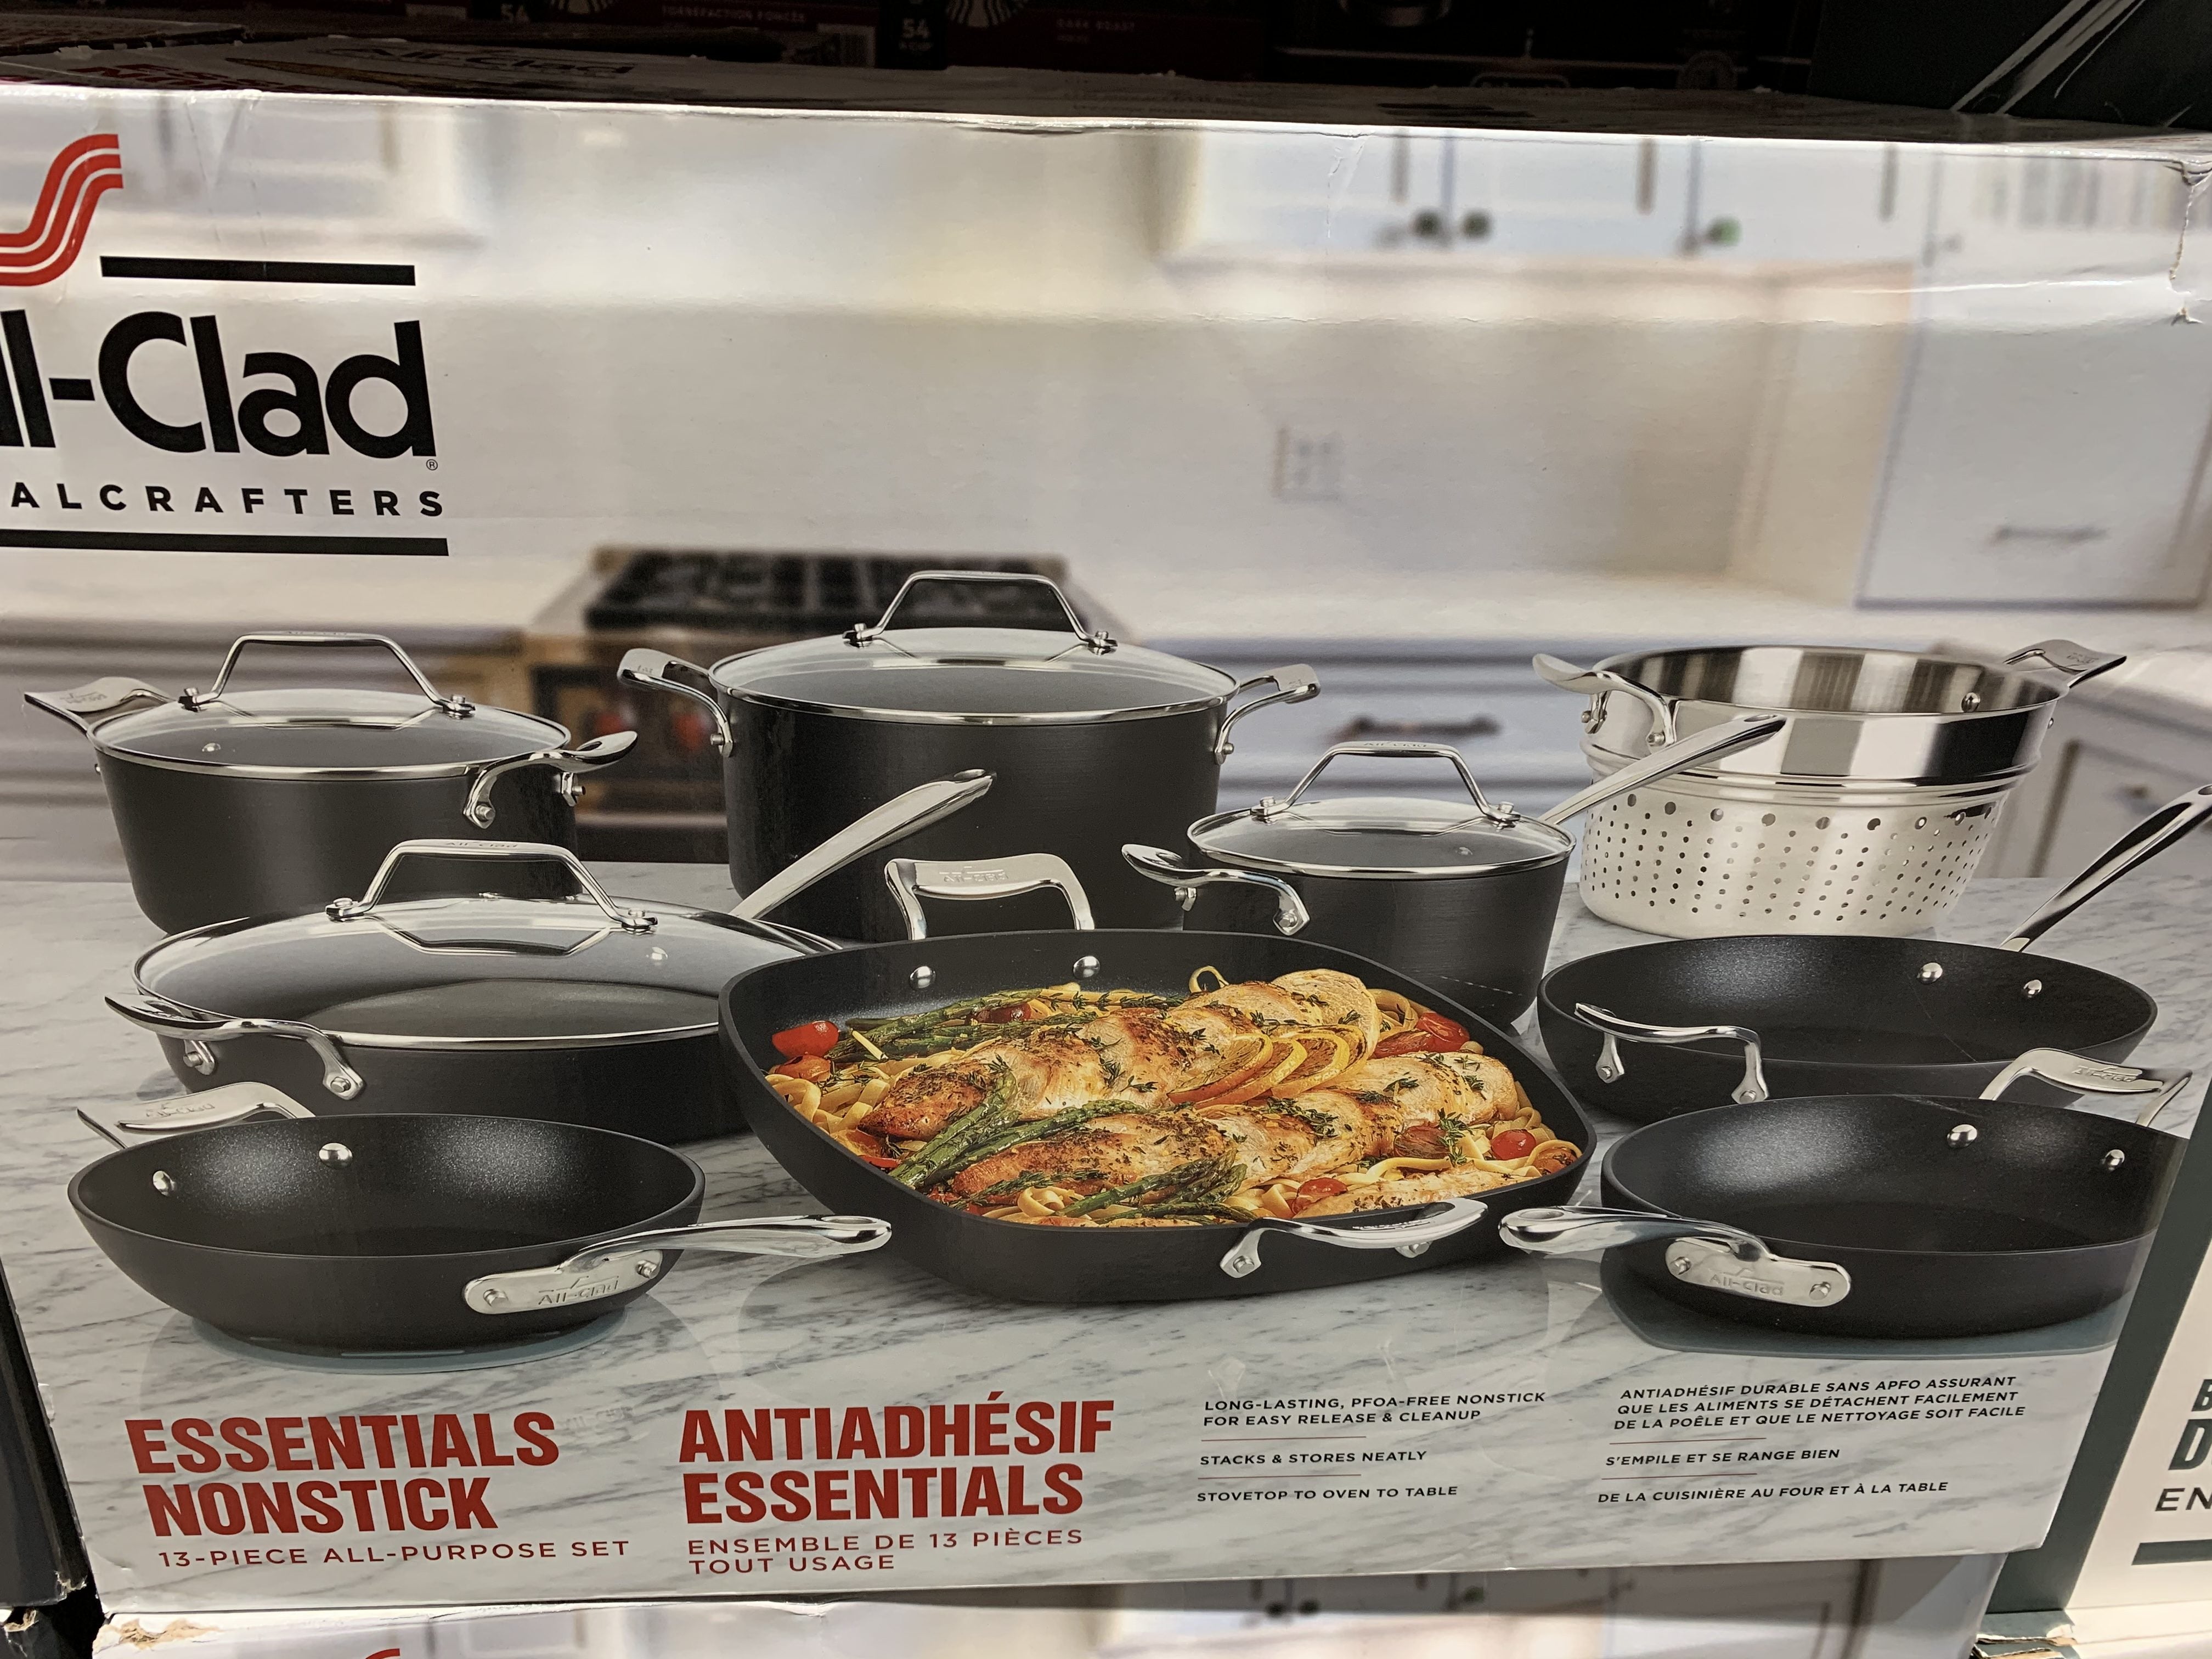 🍳 All In One 5-Quart Pans are at Costco! This includes the